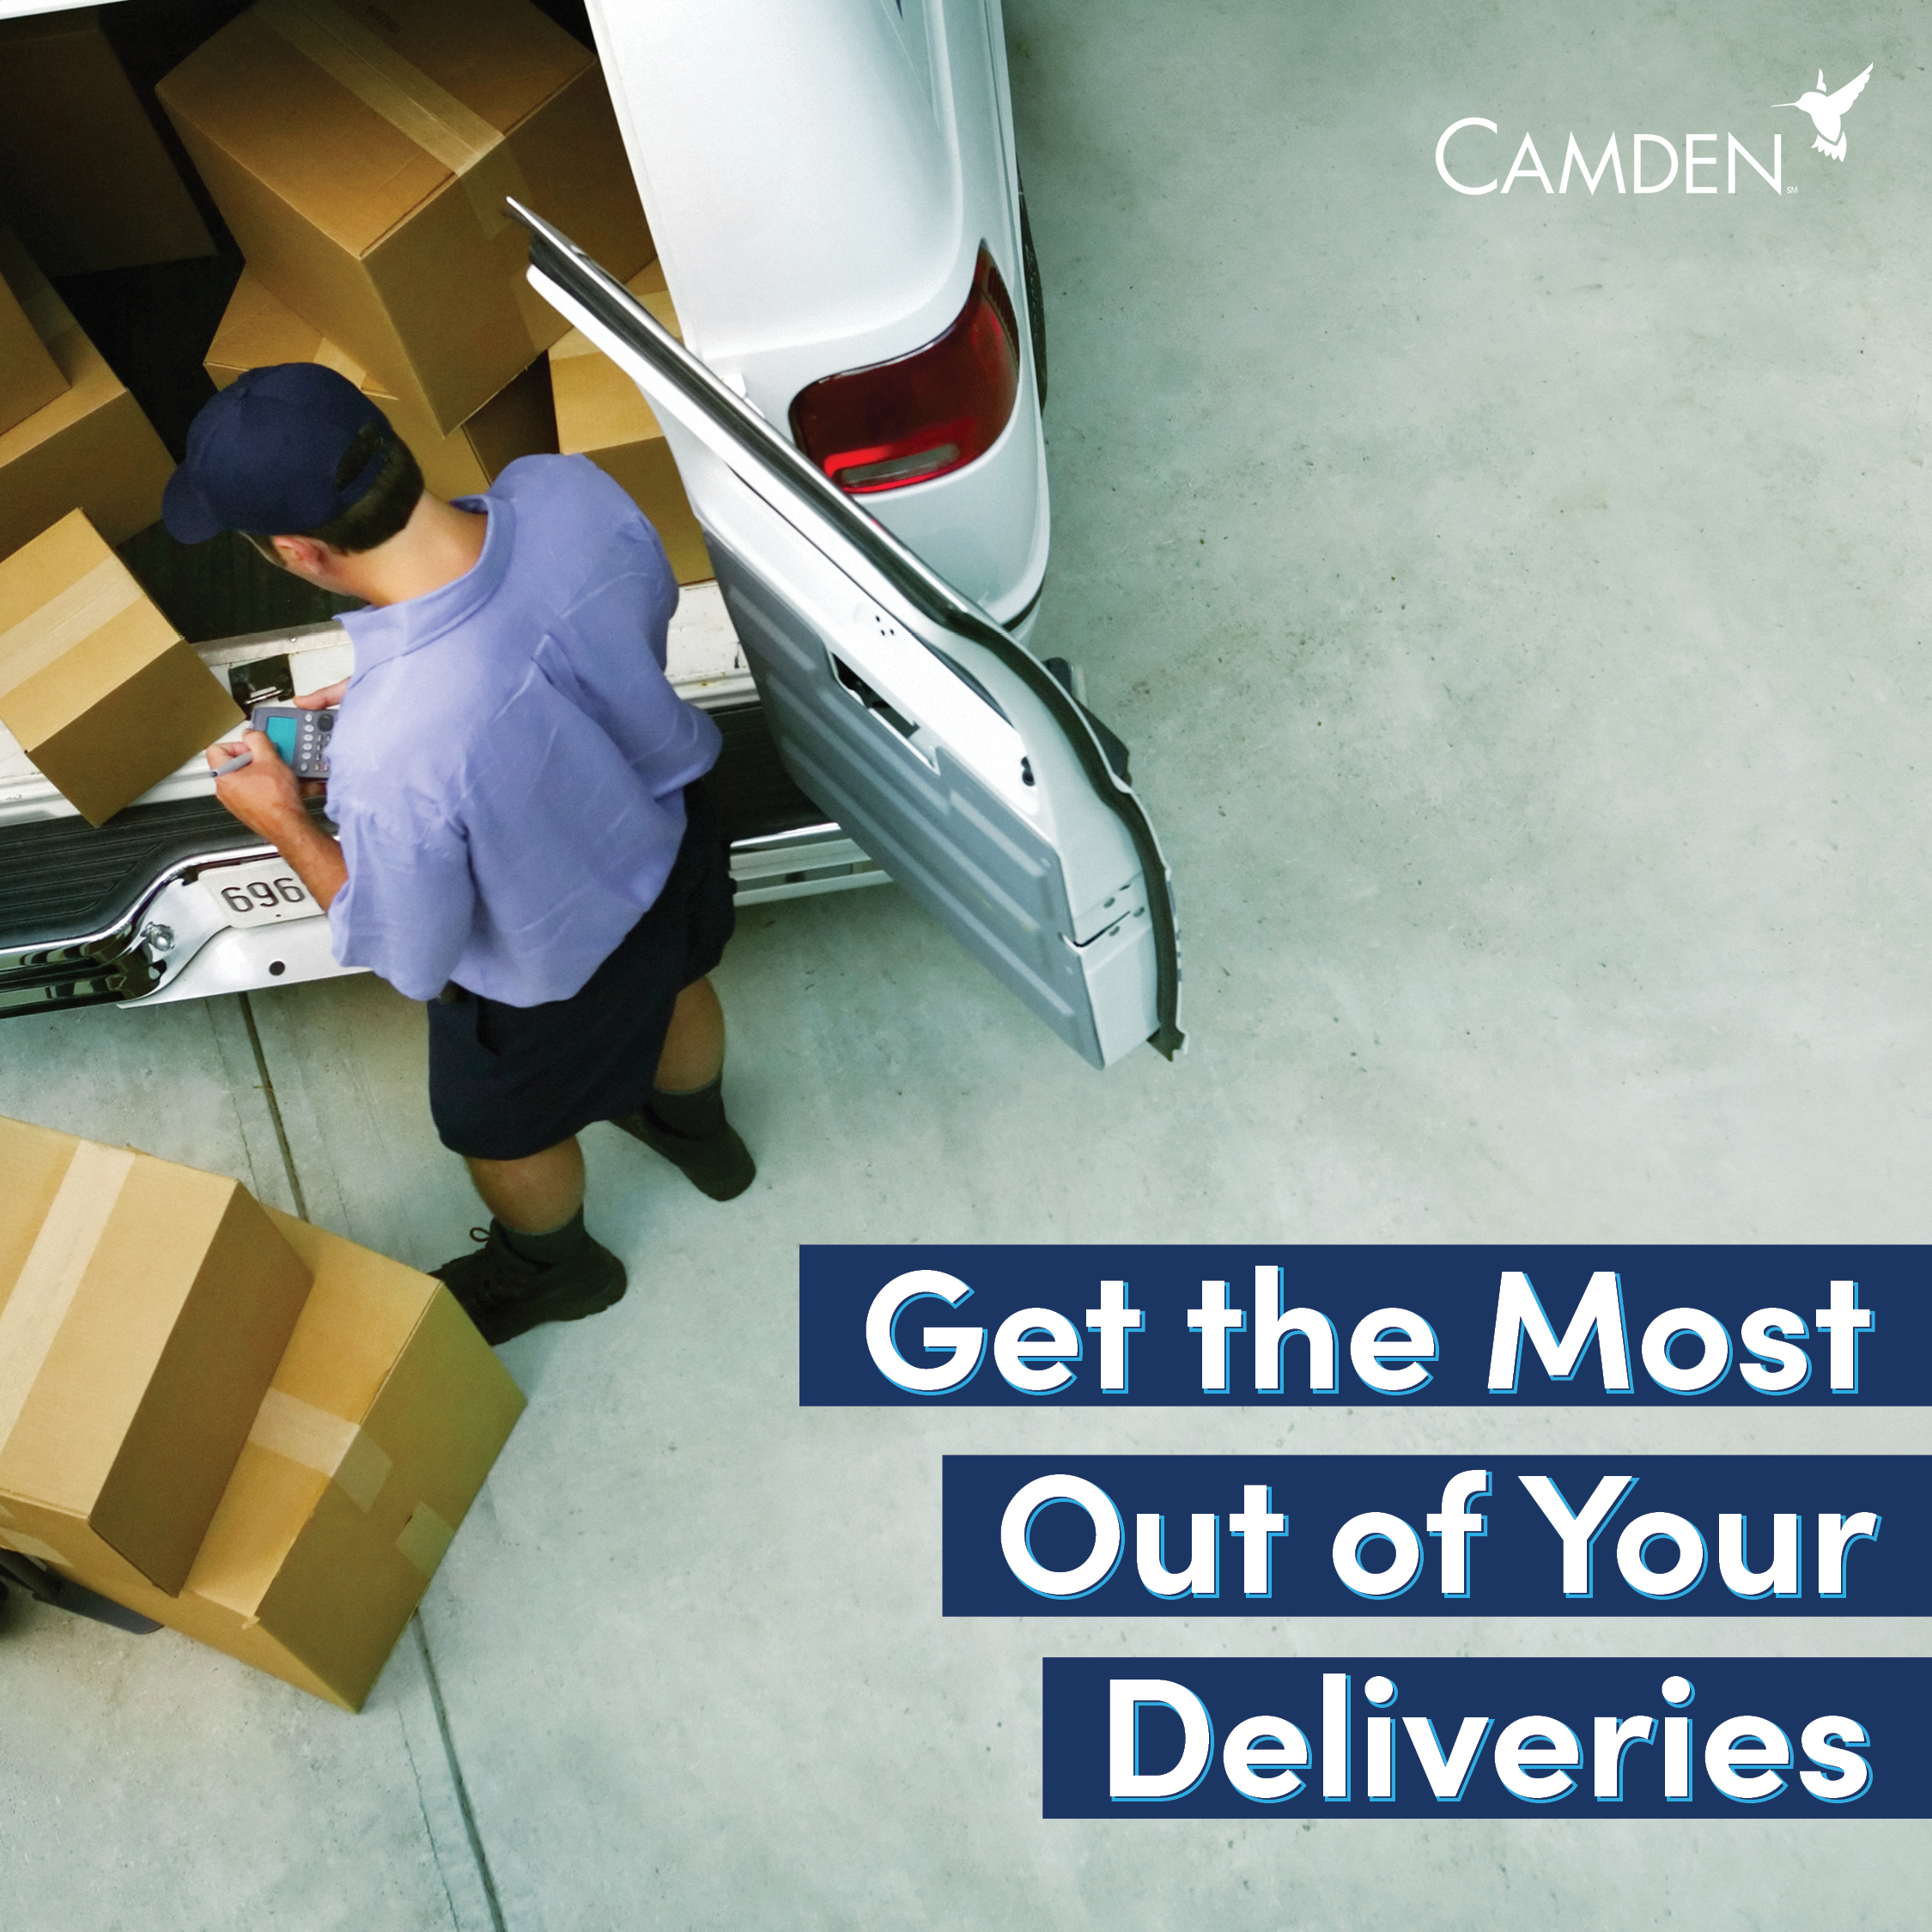 Get the most out of your package deliveries - Read about how on Simply Camden